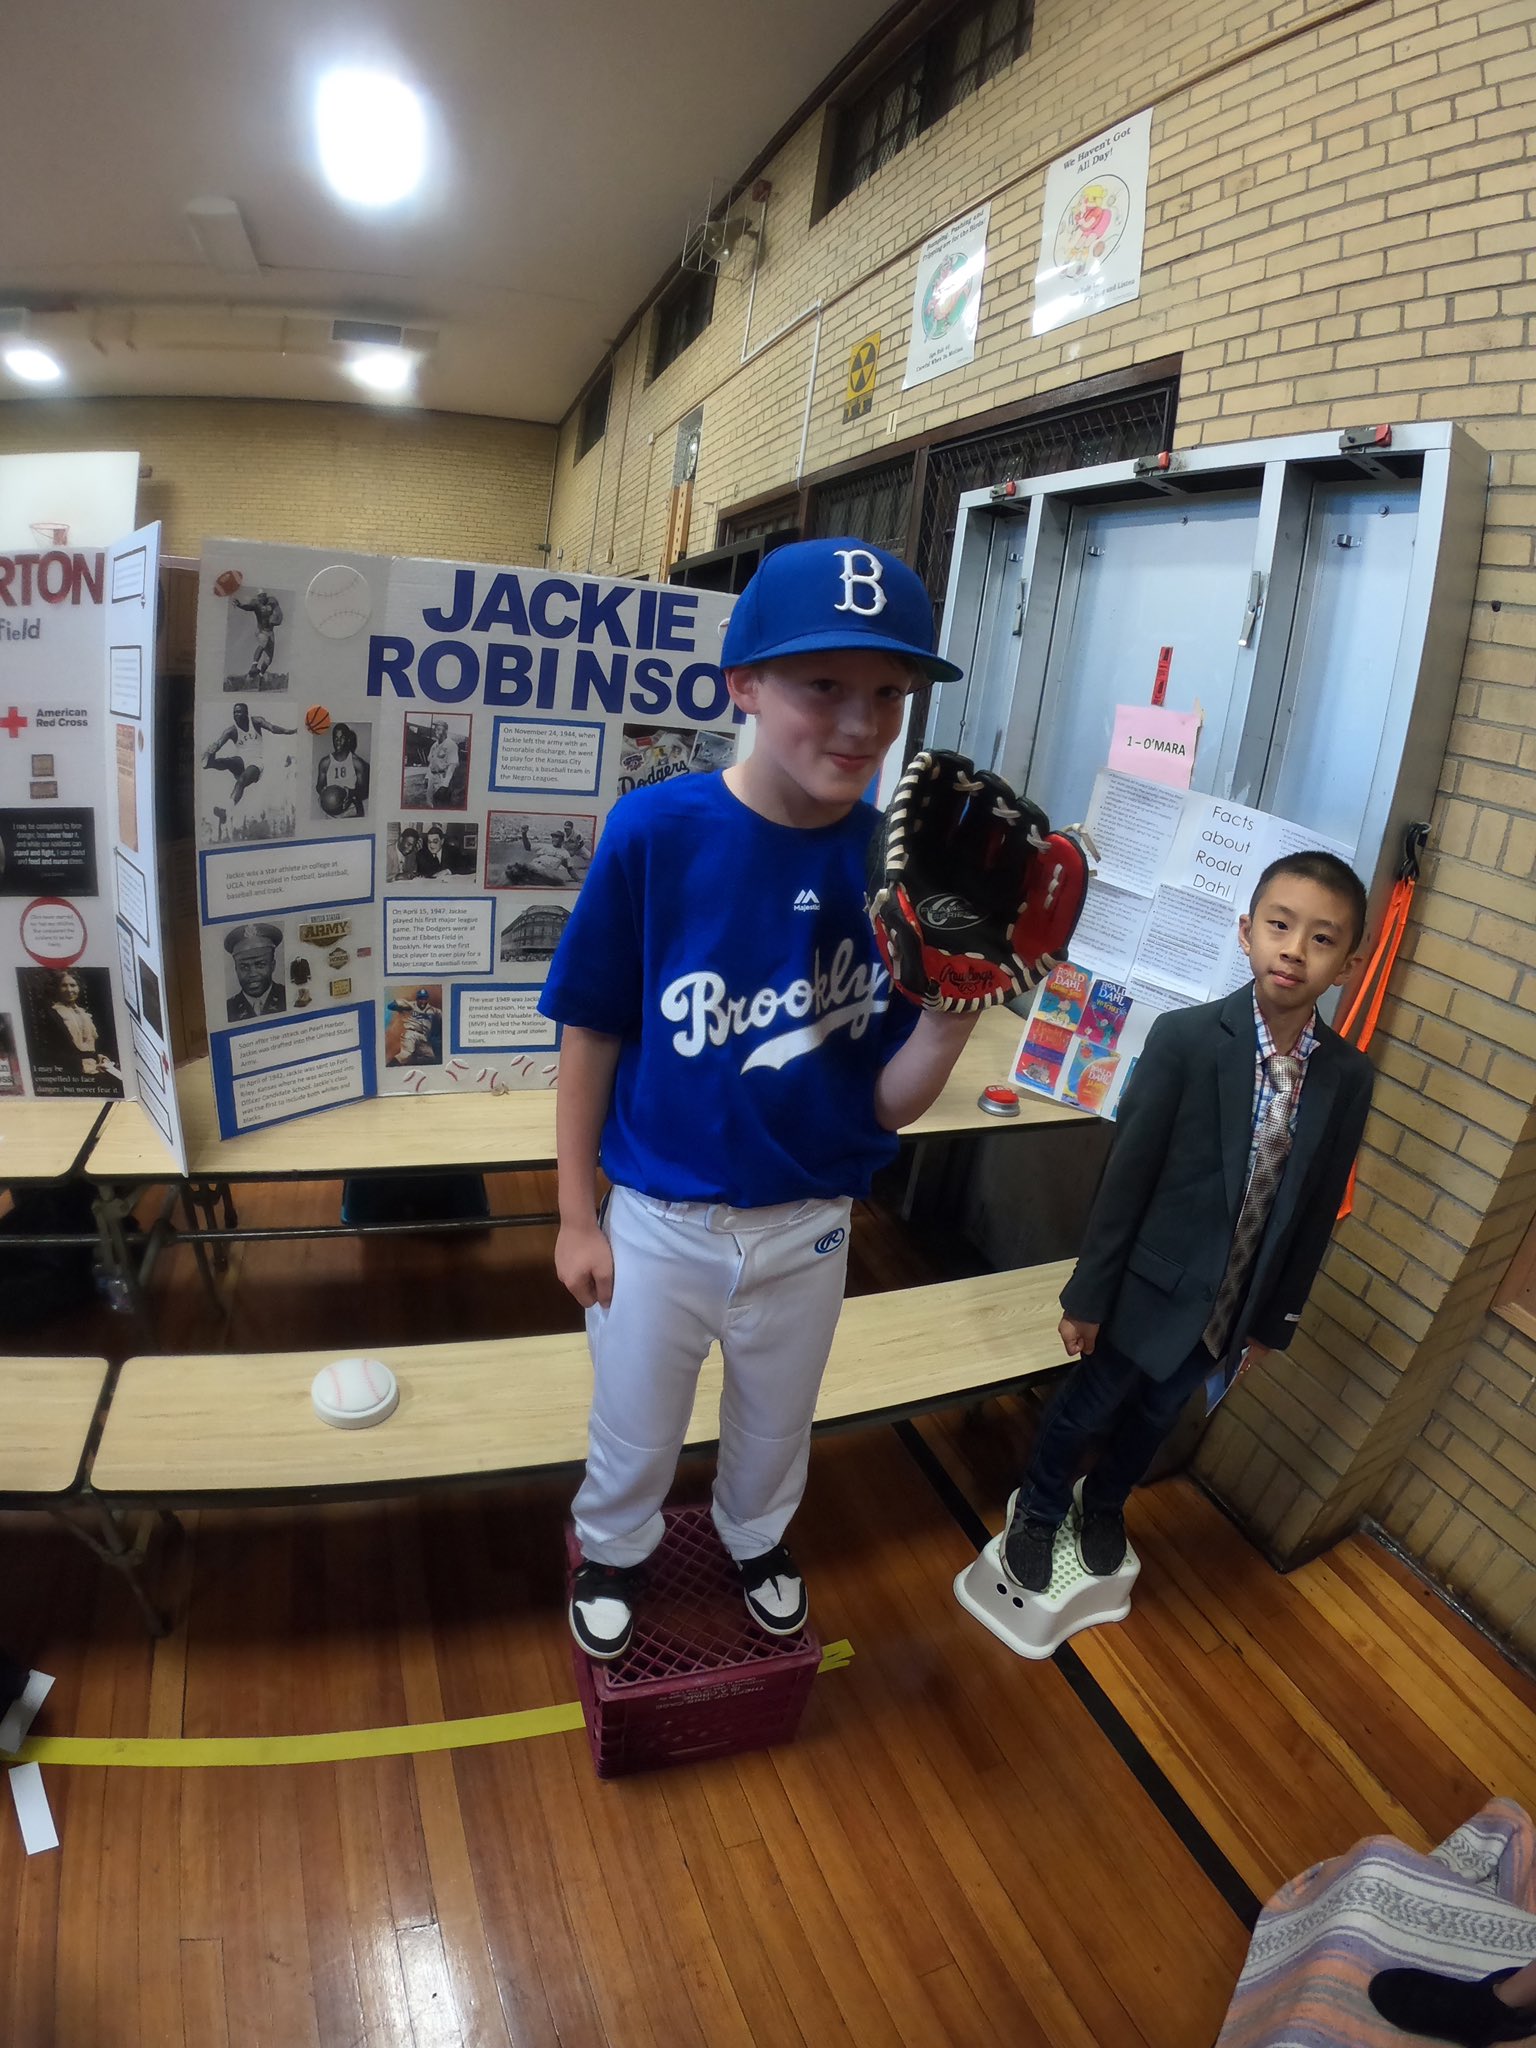 Don Drew on X: Ant chose Jackie Robinson for the 3rd grade wax